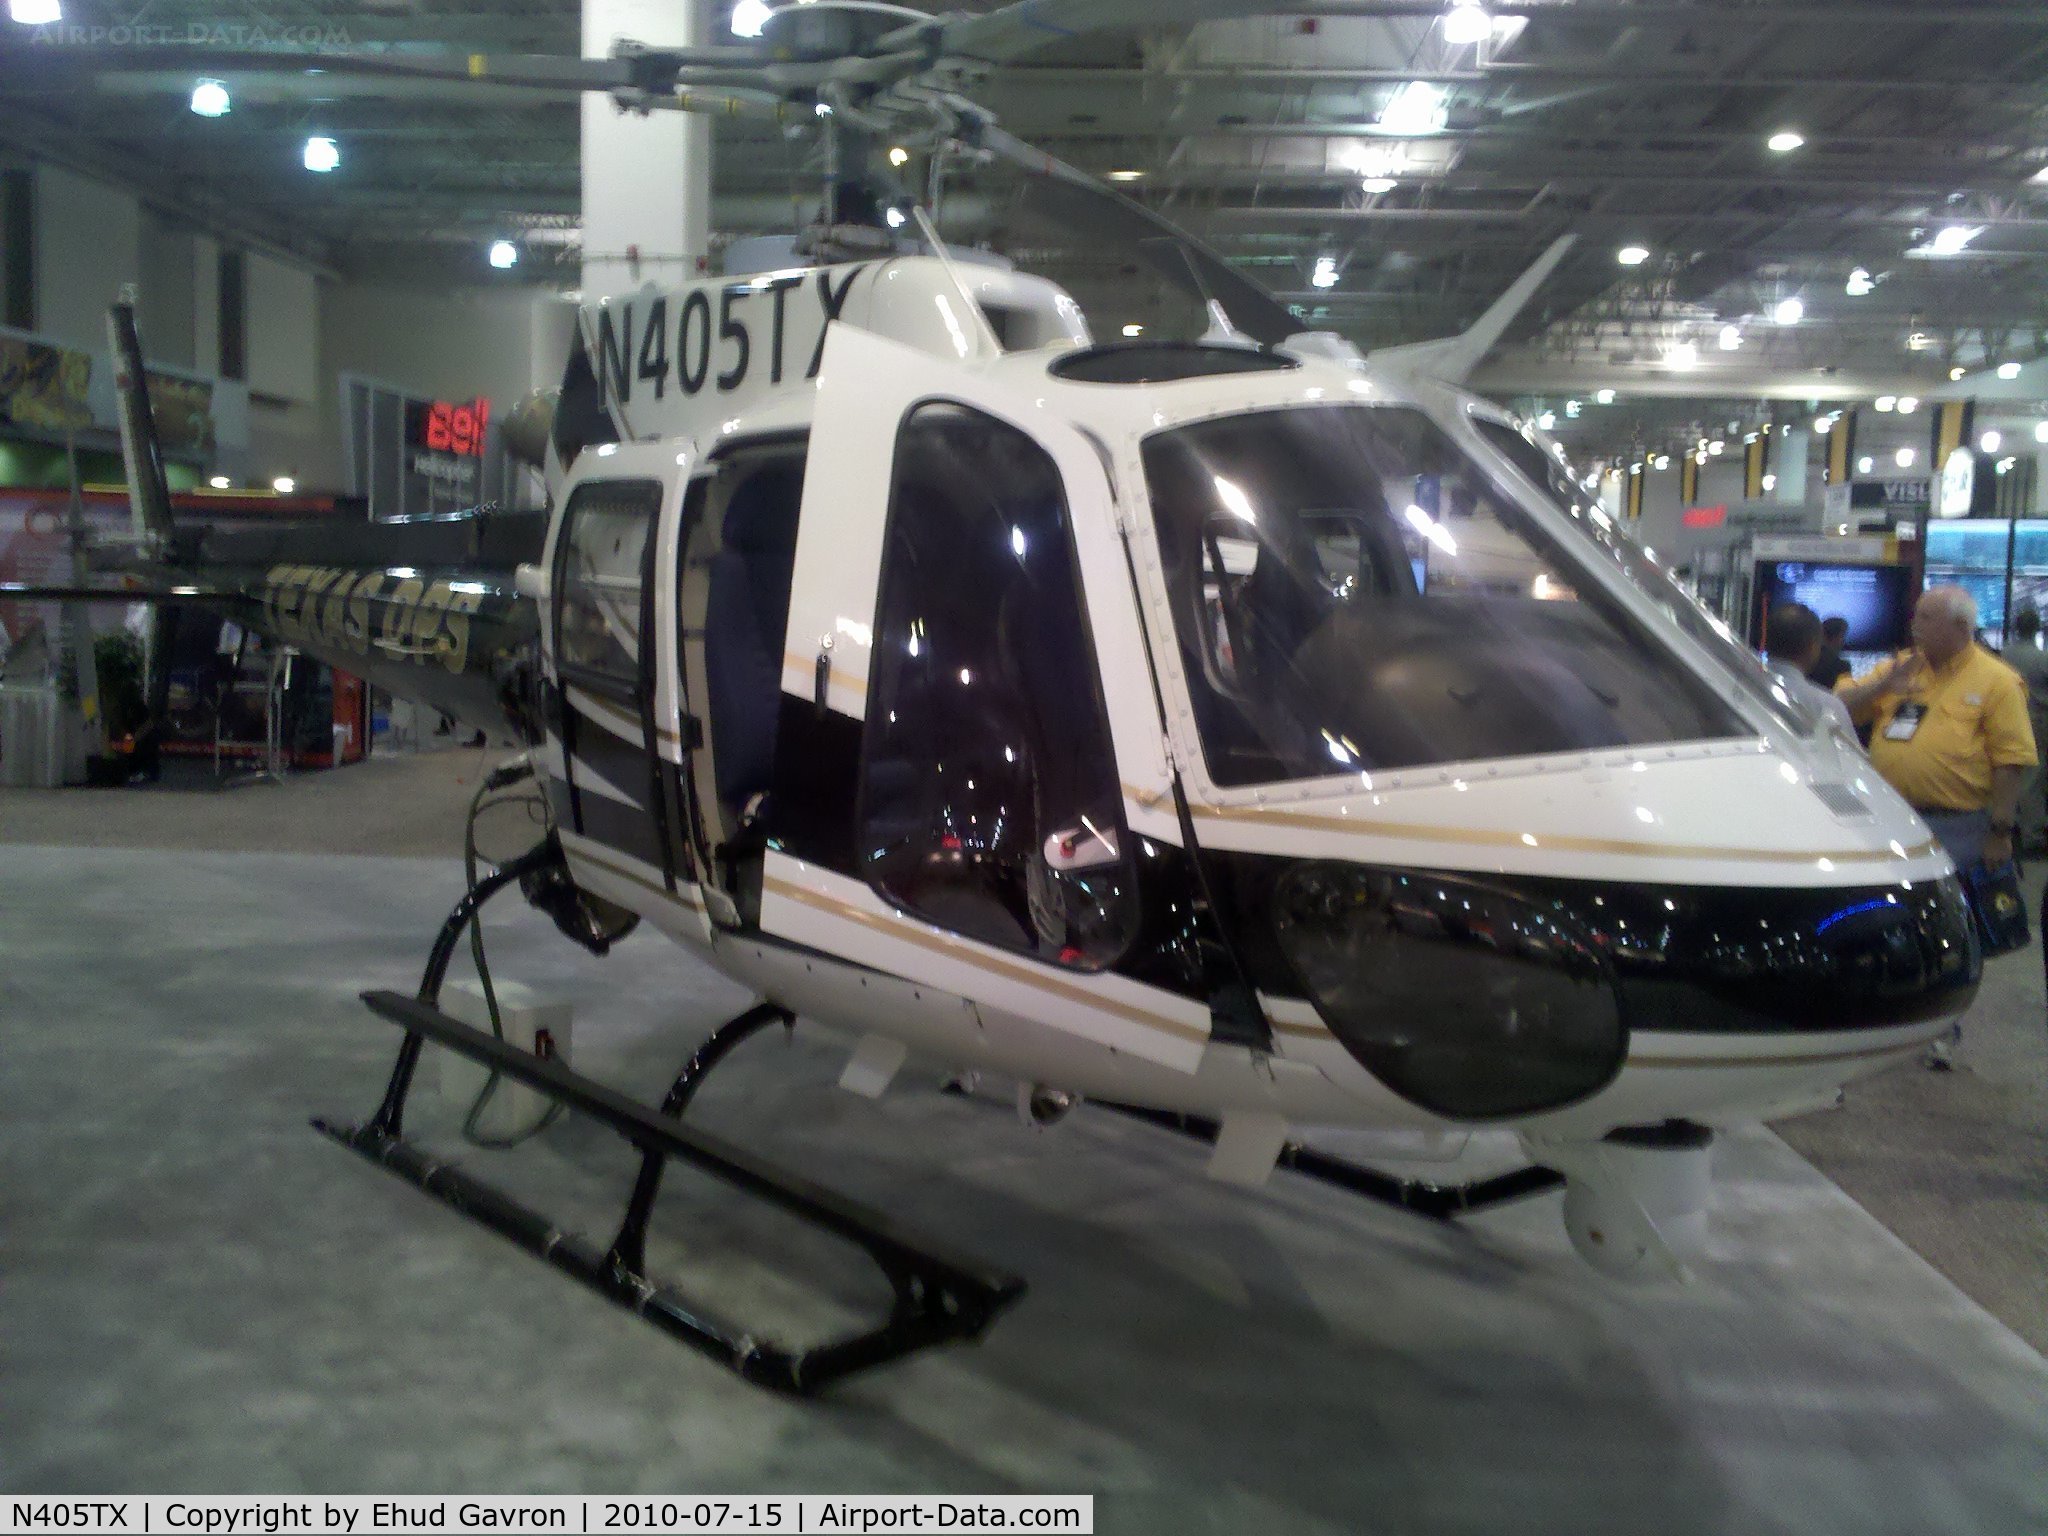 N405TX, 2008 Aerospatiale AS-350B-2 Ecureuil C/N 4476, Texas Department of Public Safety helicopter on display at the Airborne Law Enforcement Assocation convention, Tucson Convention Center, Tucson AZ.